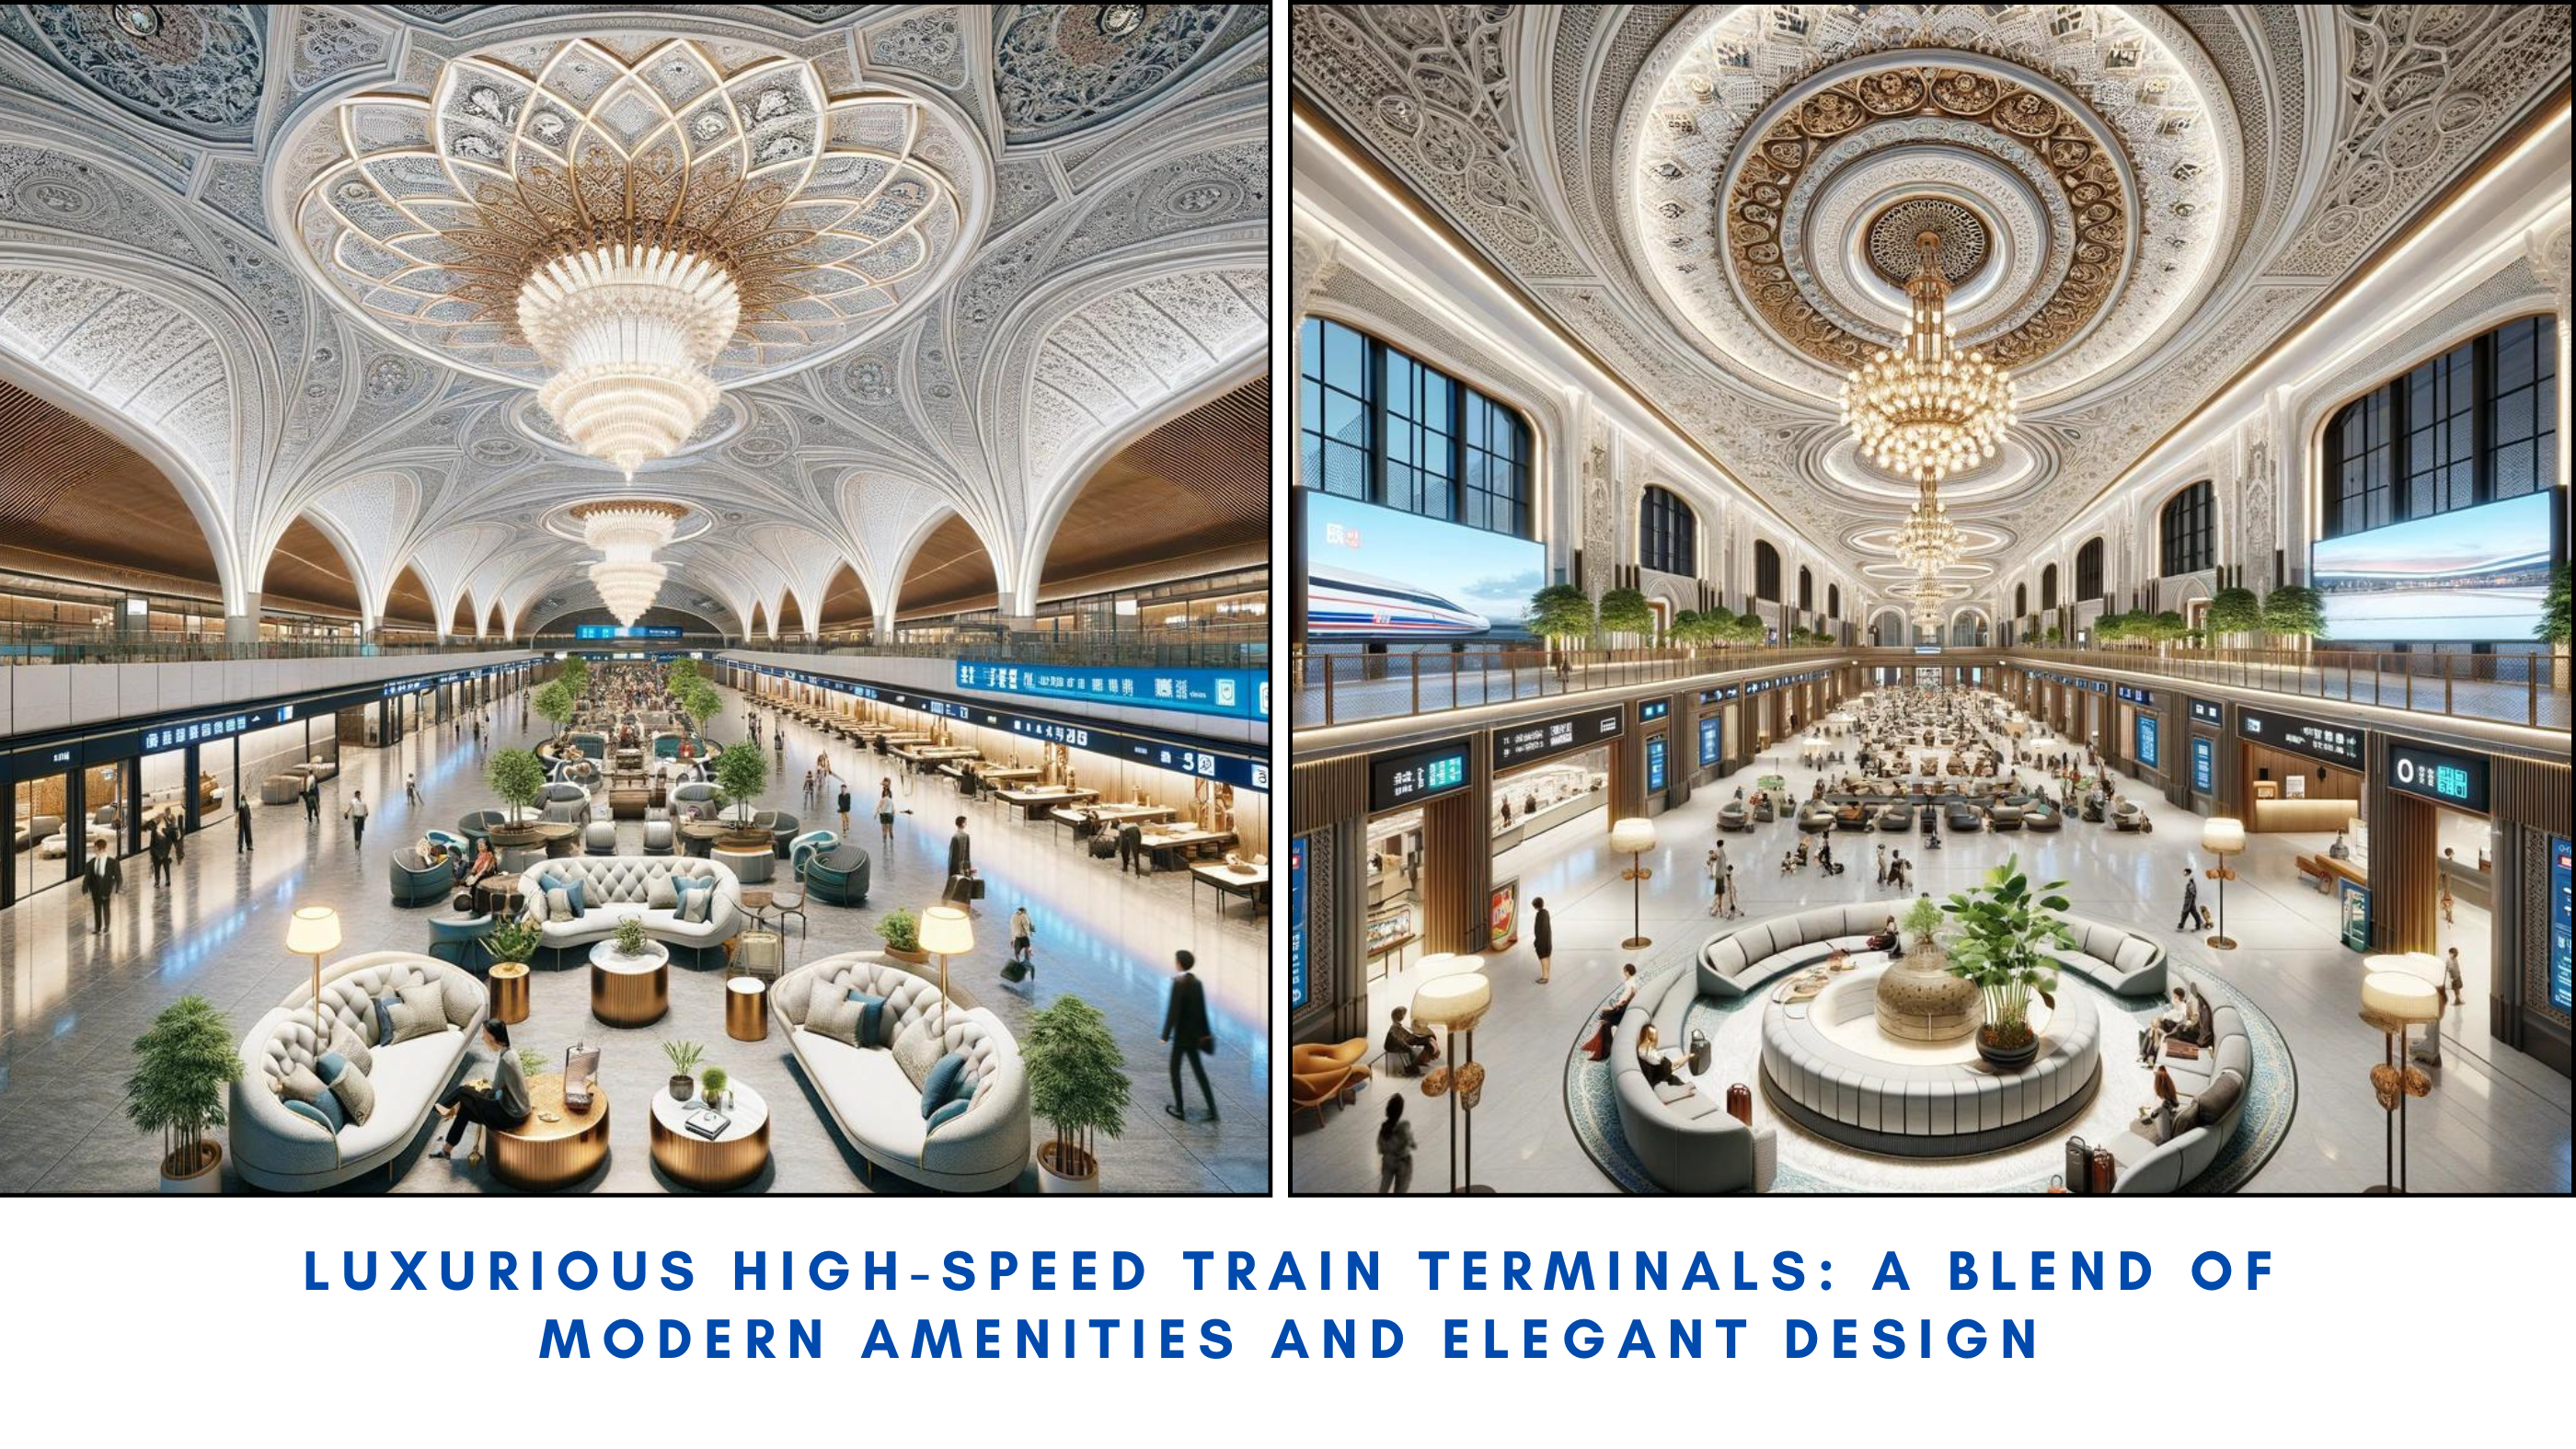 Luxurious high-speed train terminal with intricate ceiling design, elegant seating arrangements, and modern amenities featuring grand chandeliers and detailed architectural elements